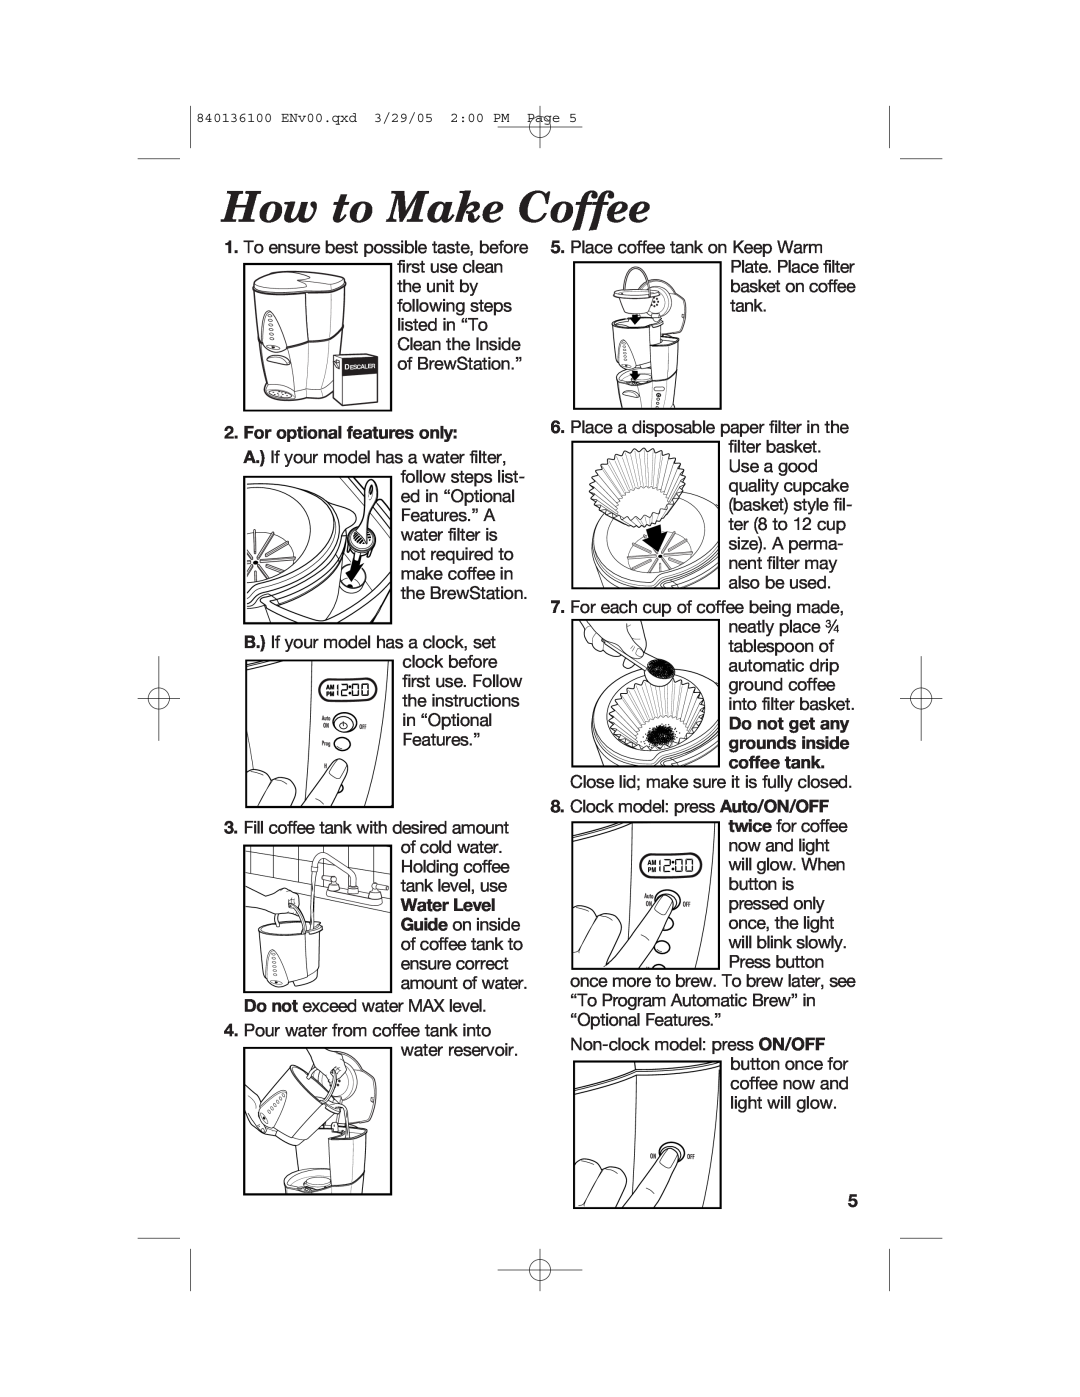 Hamilton Beach 840136100 manual How to Make Coffee, For optional features only, Water Level, Do not get any grounds inside 